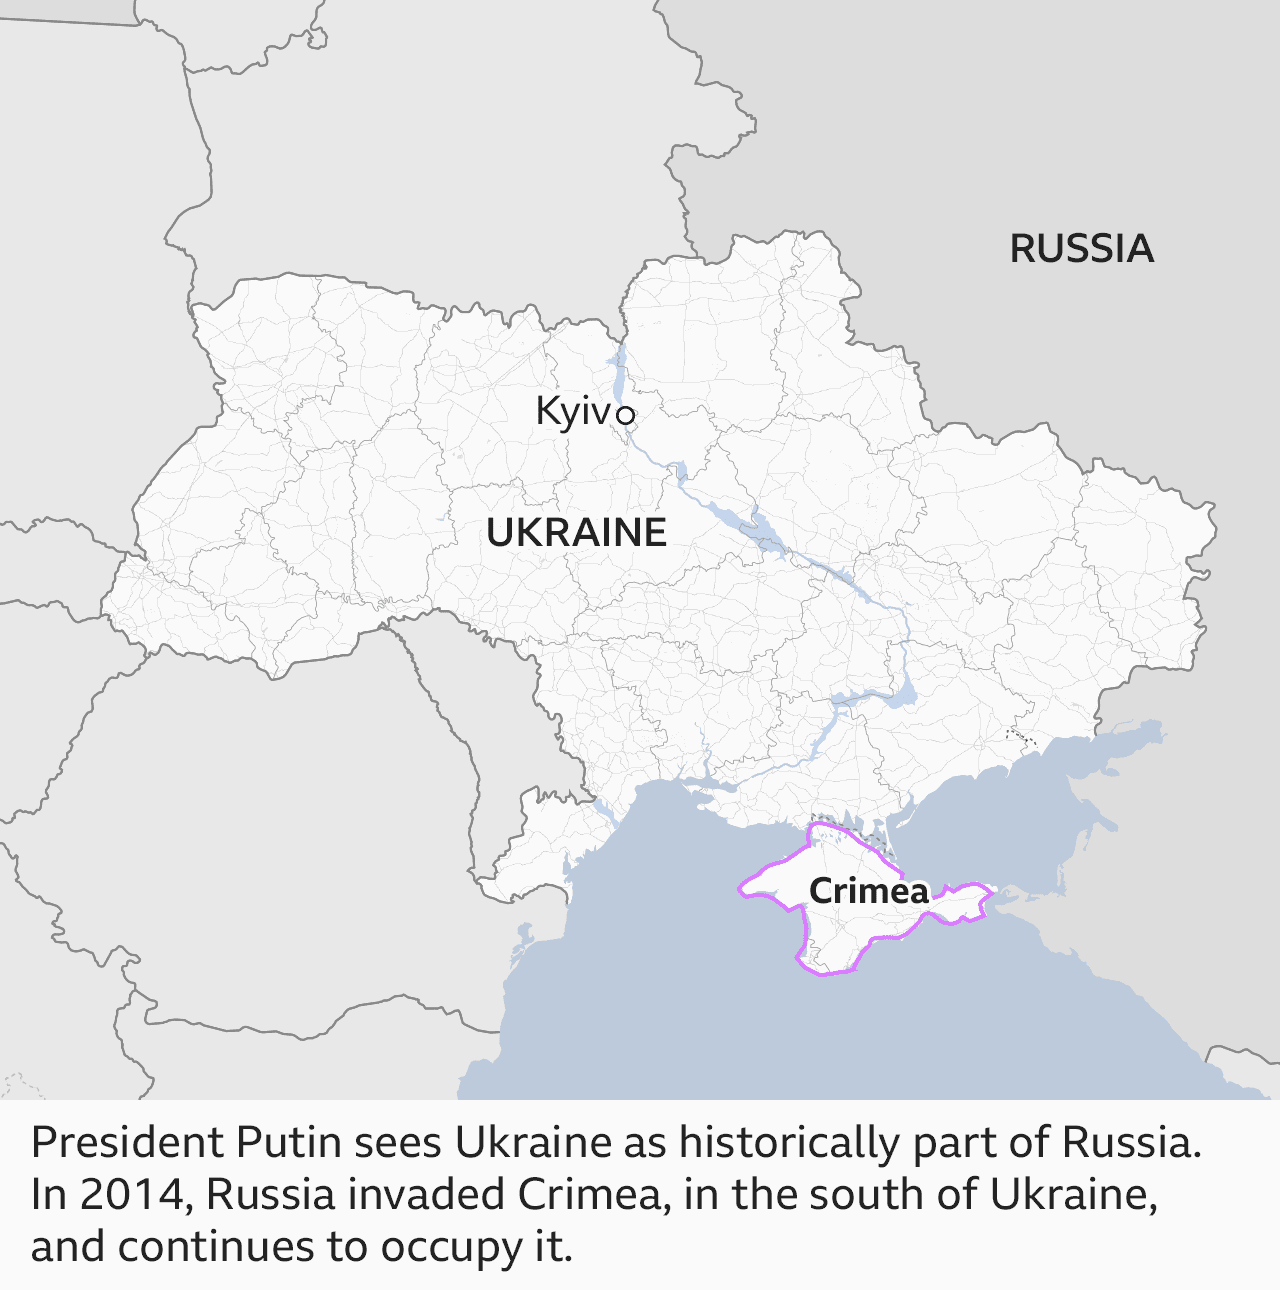 Russia Invades Ukraine. What Does it Mean?